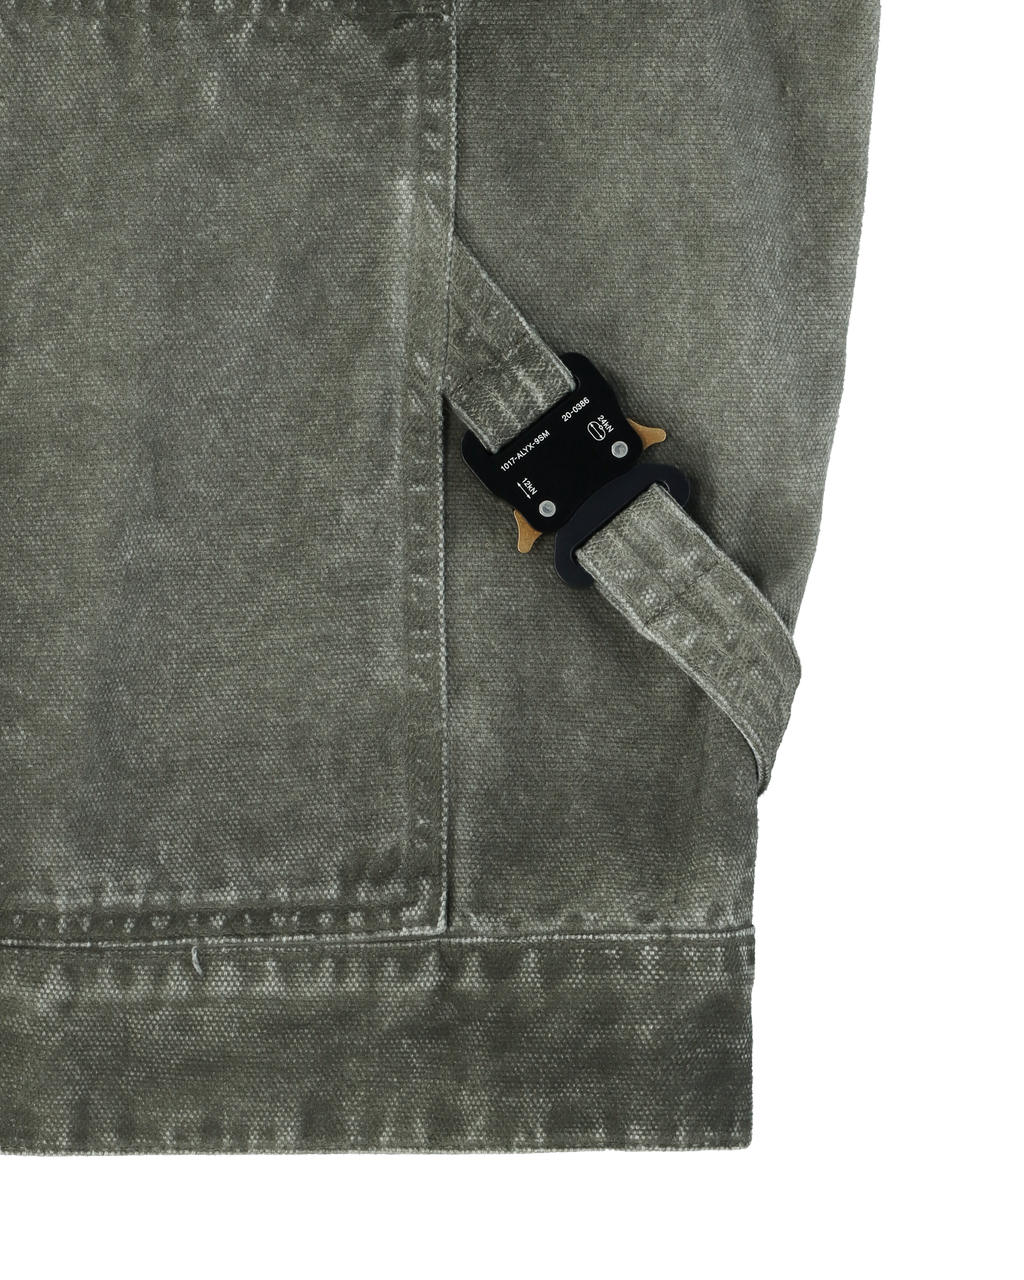 1017 ALYX 9SM | OVERDYED CANVAS BUCKLE JACKET | OUTERWEAR